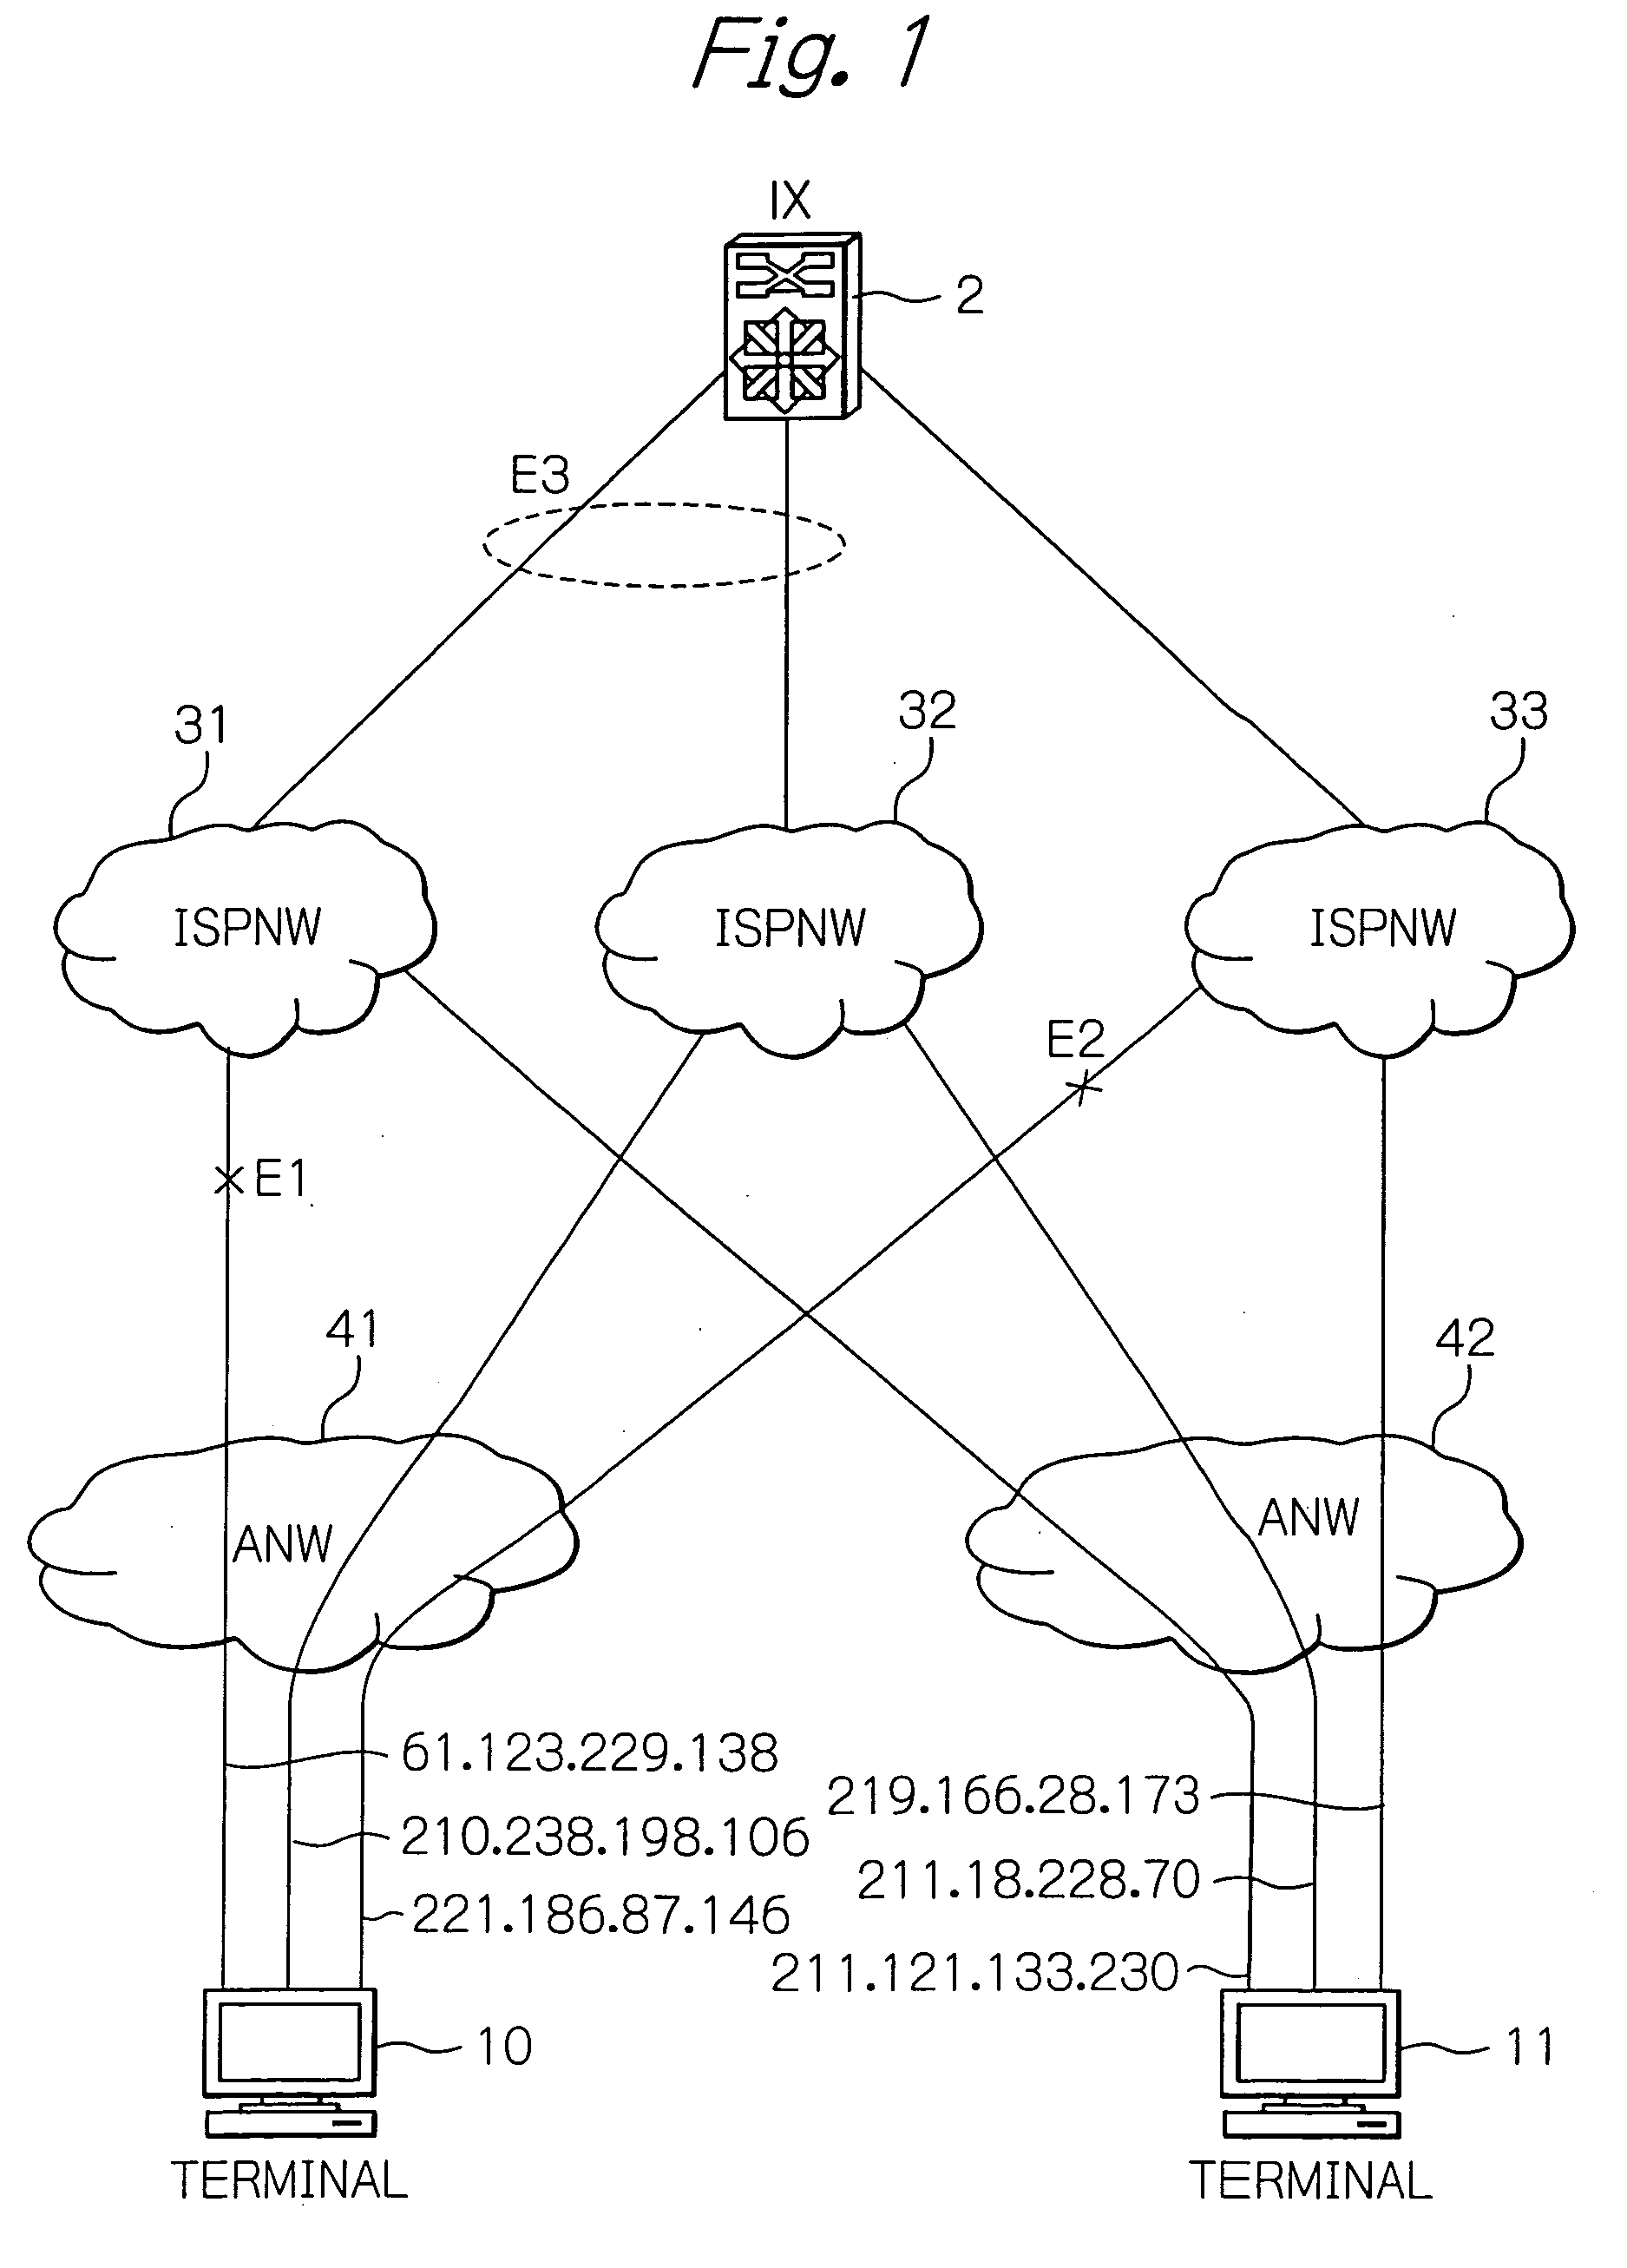 Method for detecting failure location of network in the internet